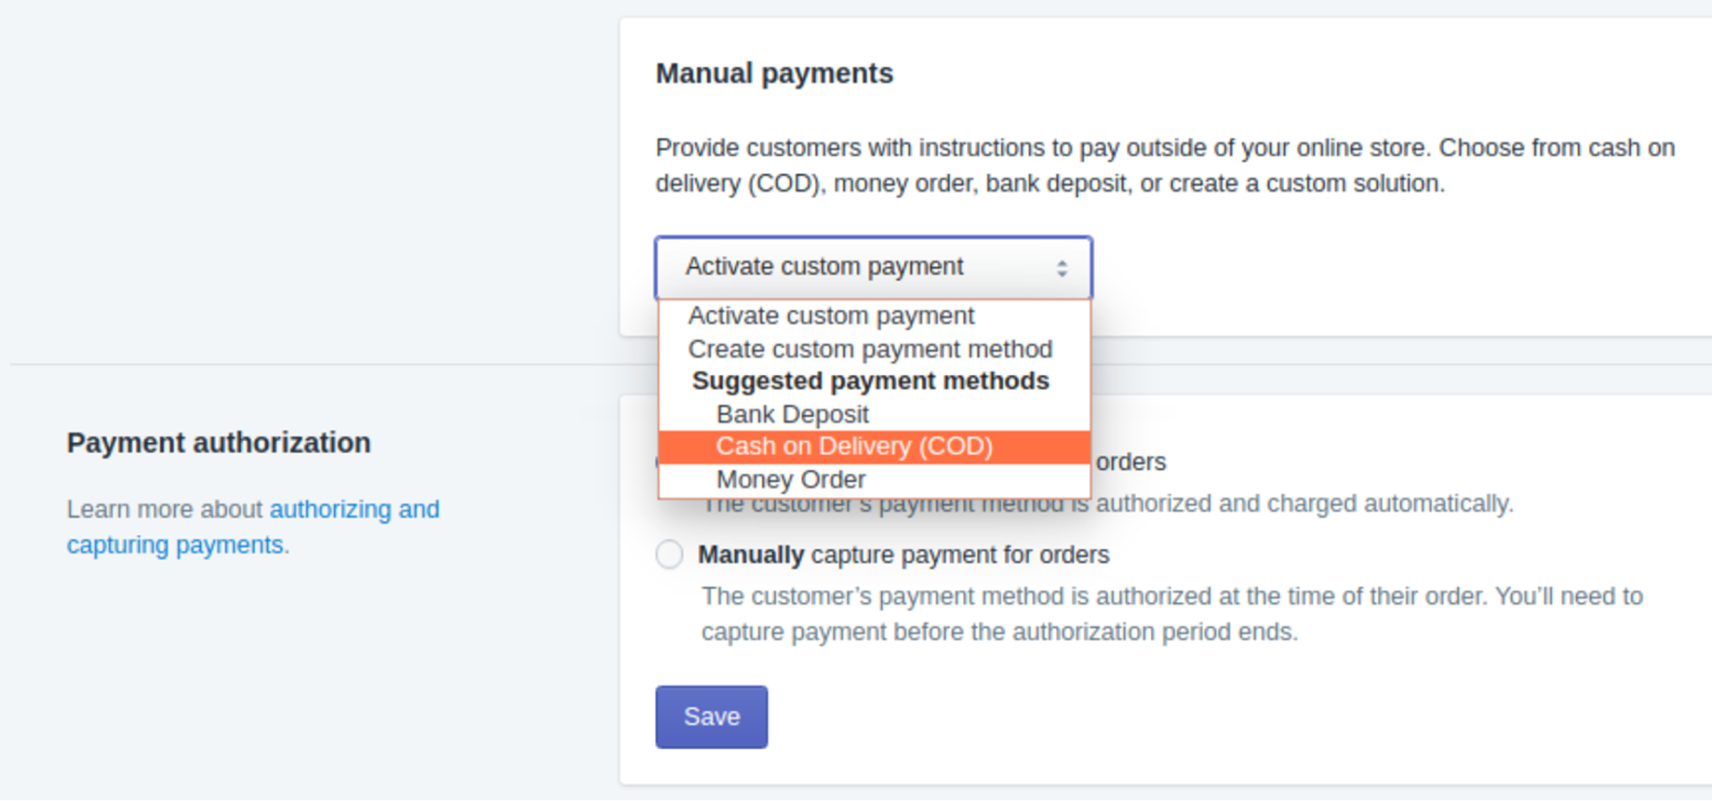 shopify-payment-providers